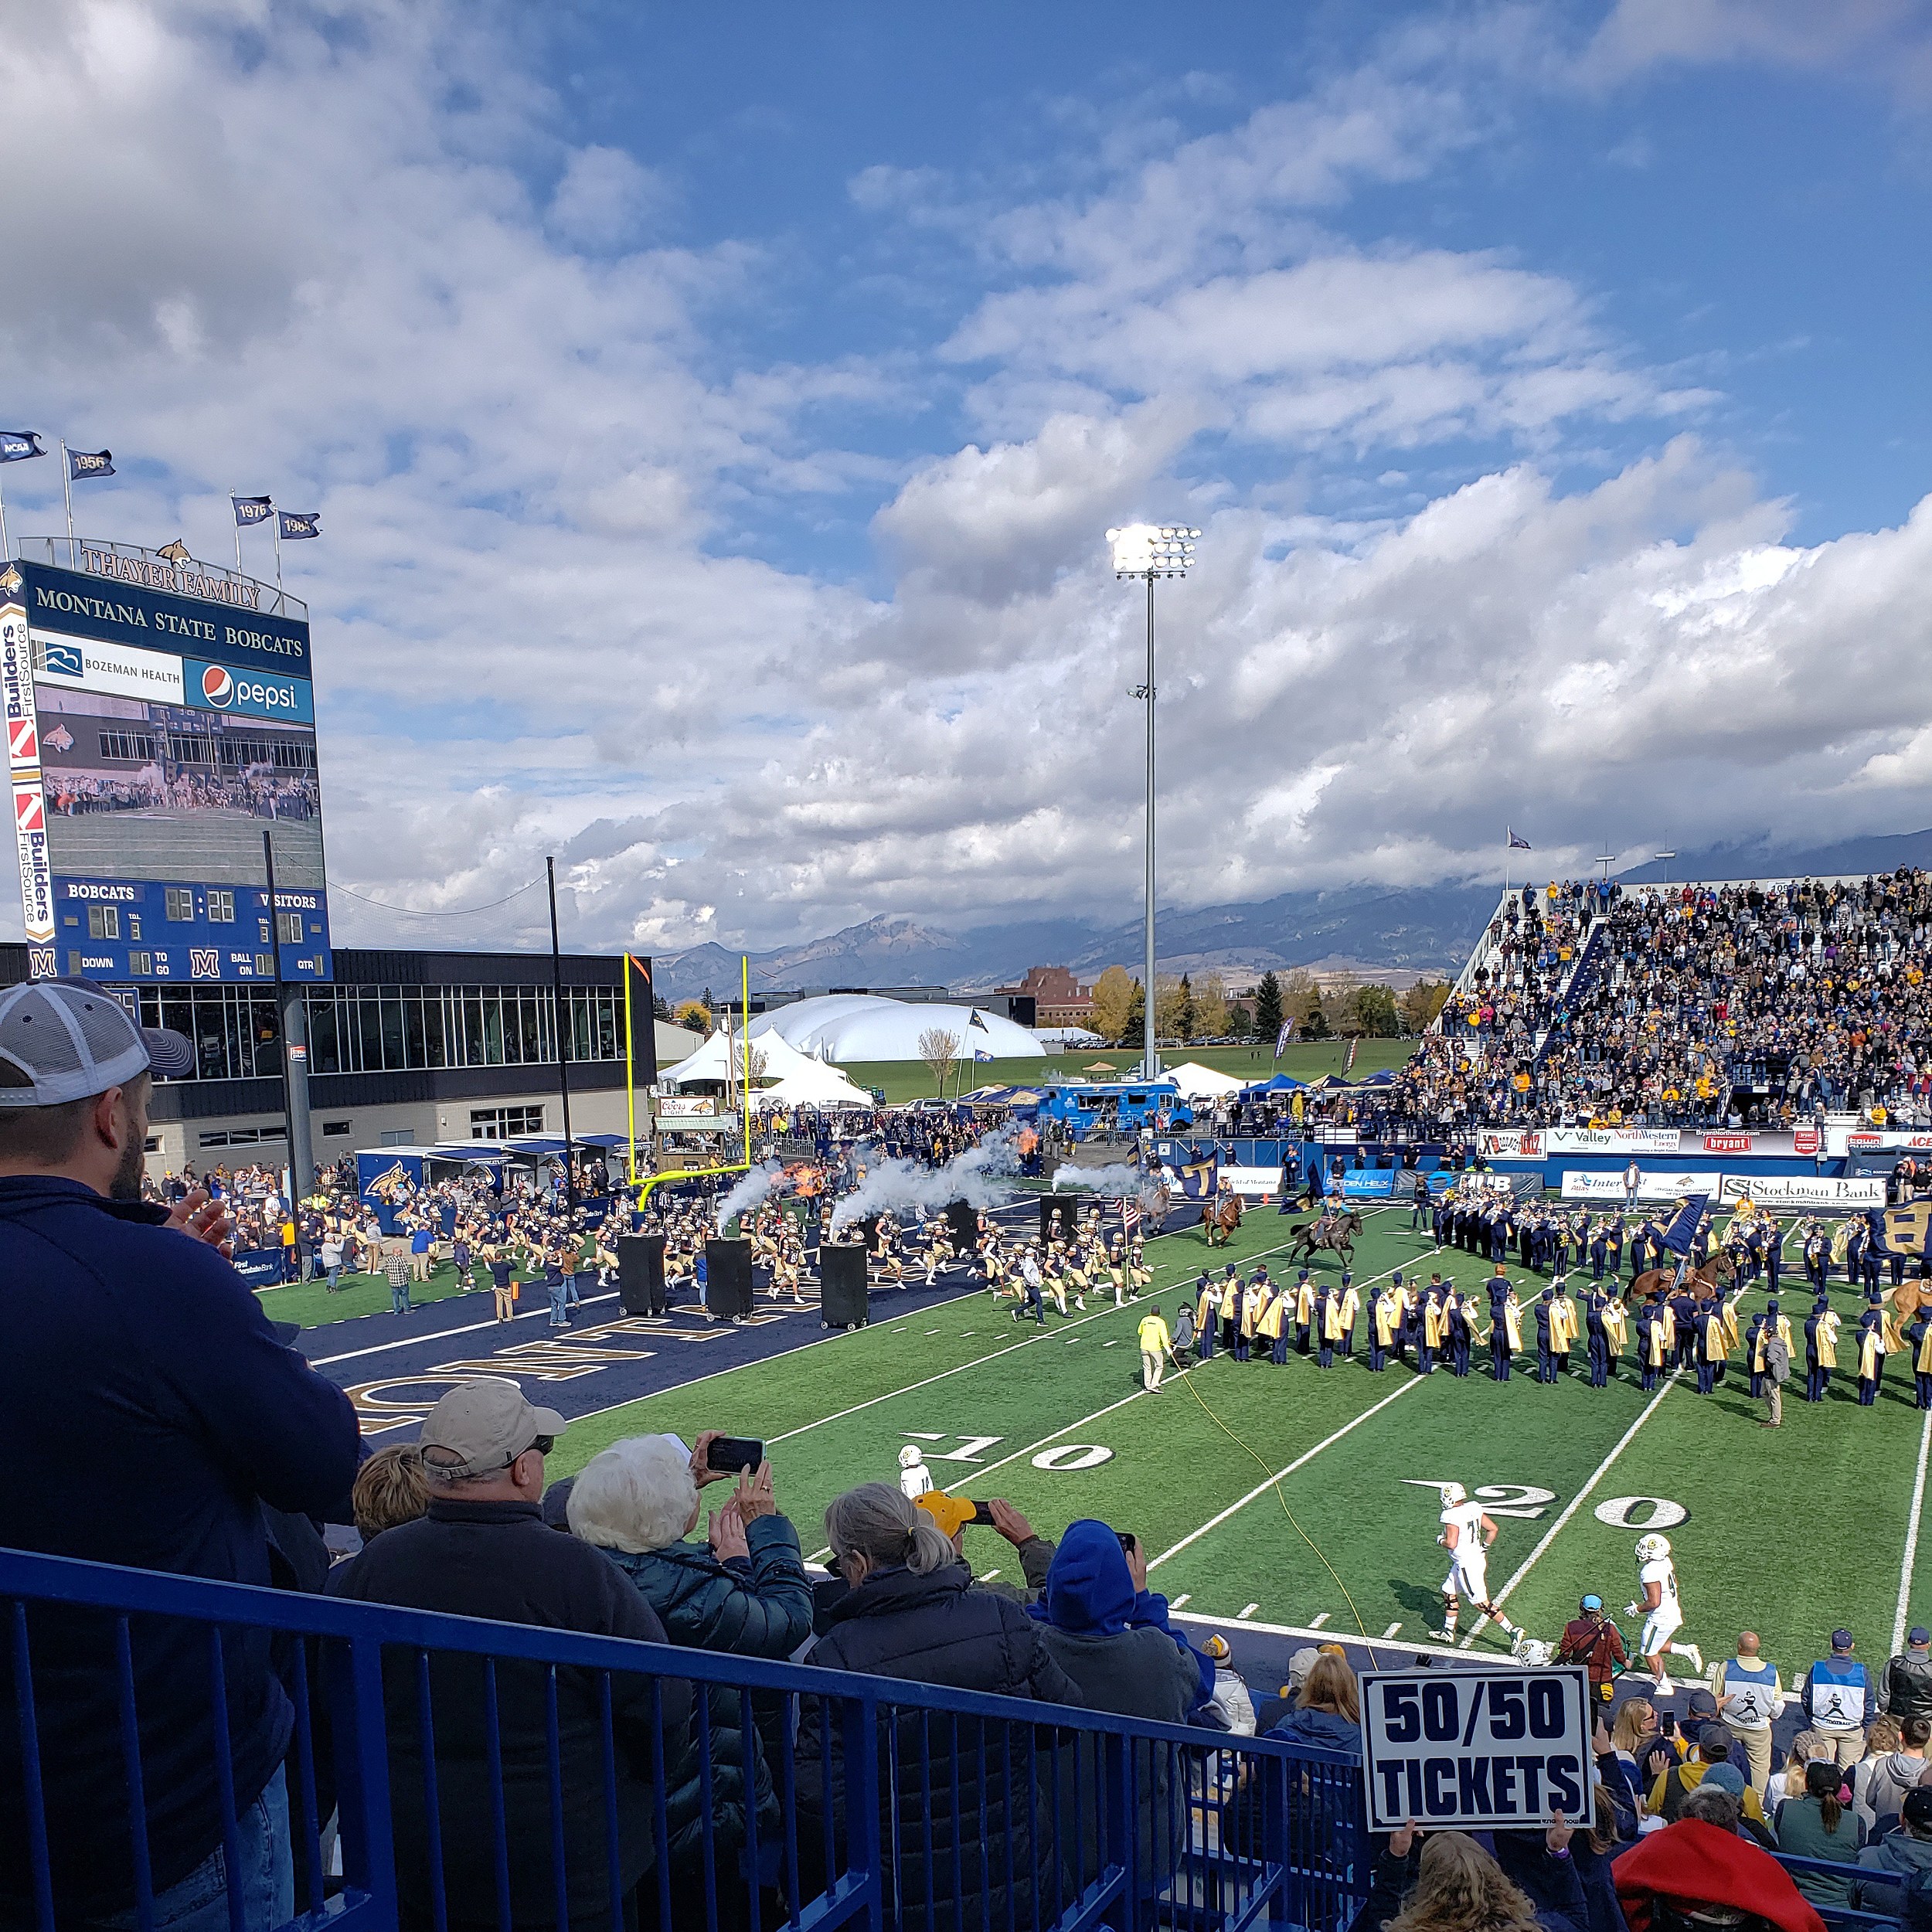 Montana State Loses Starting Quarterback For Playoff Game